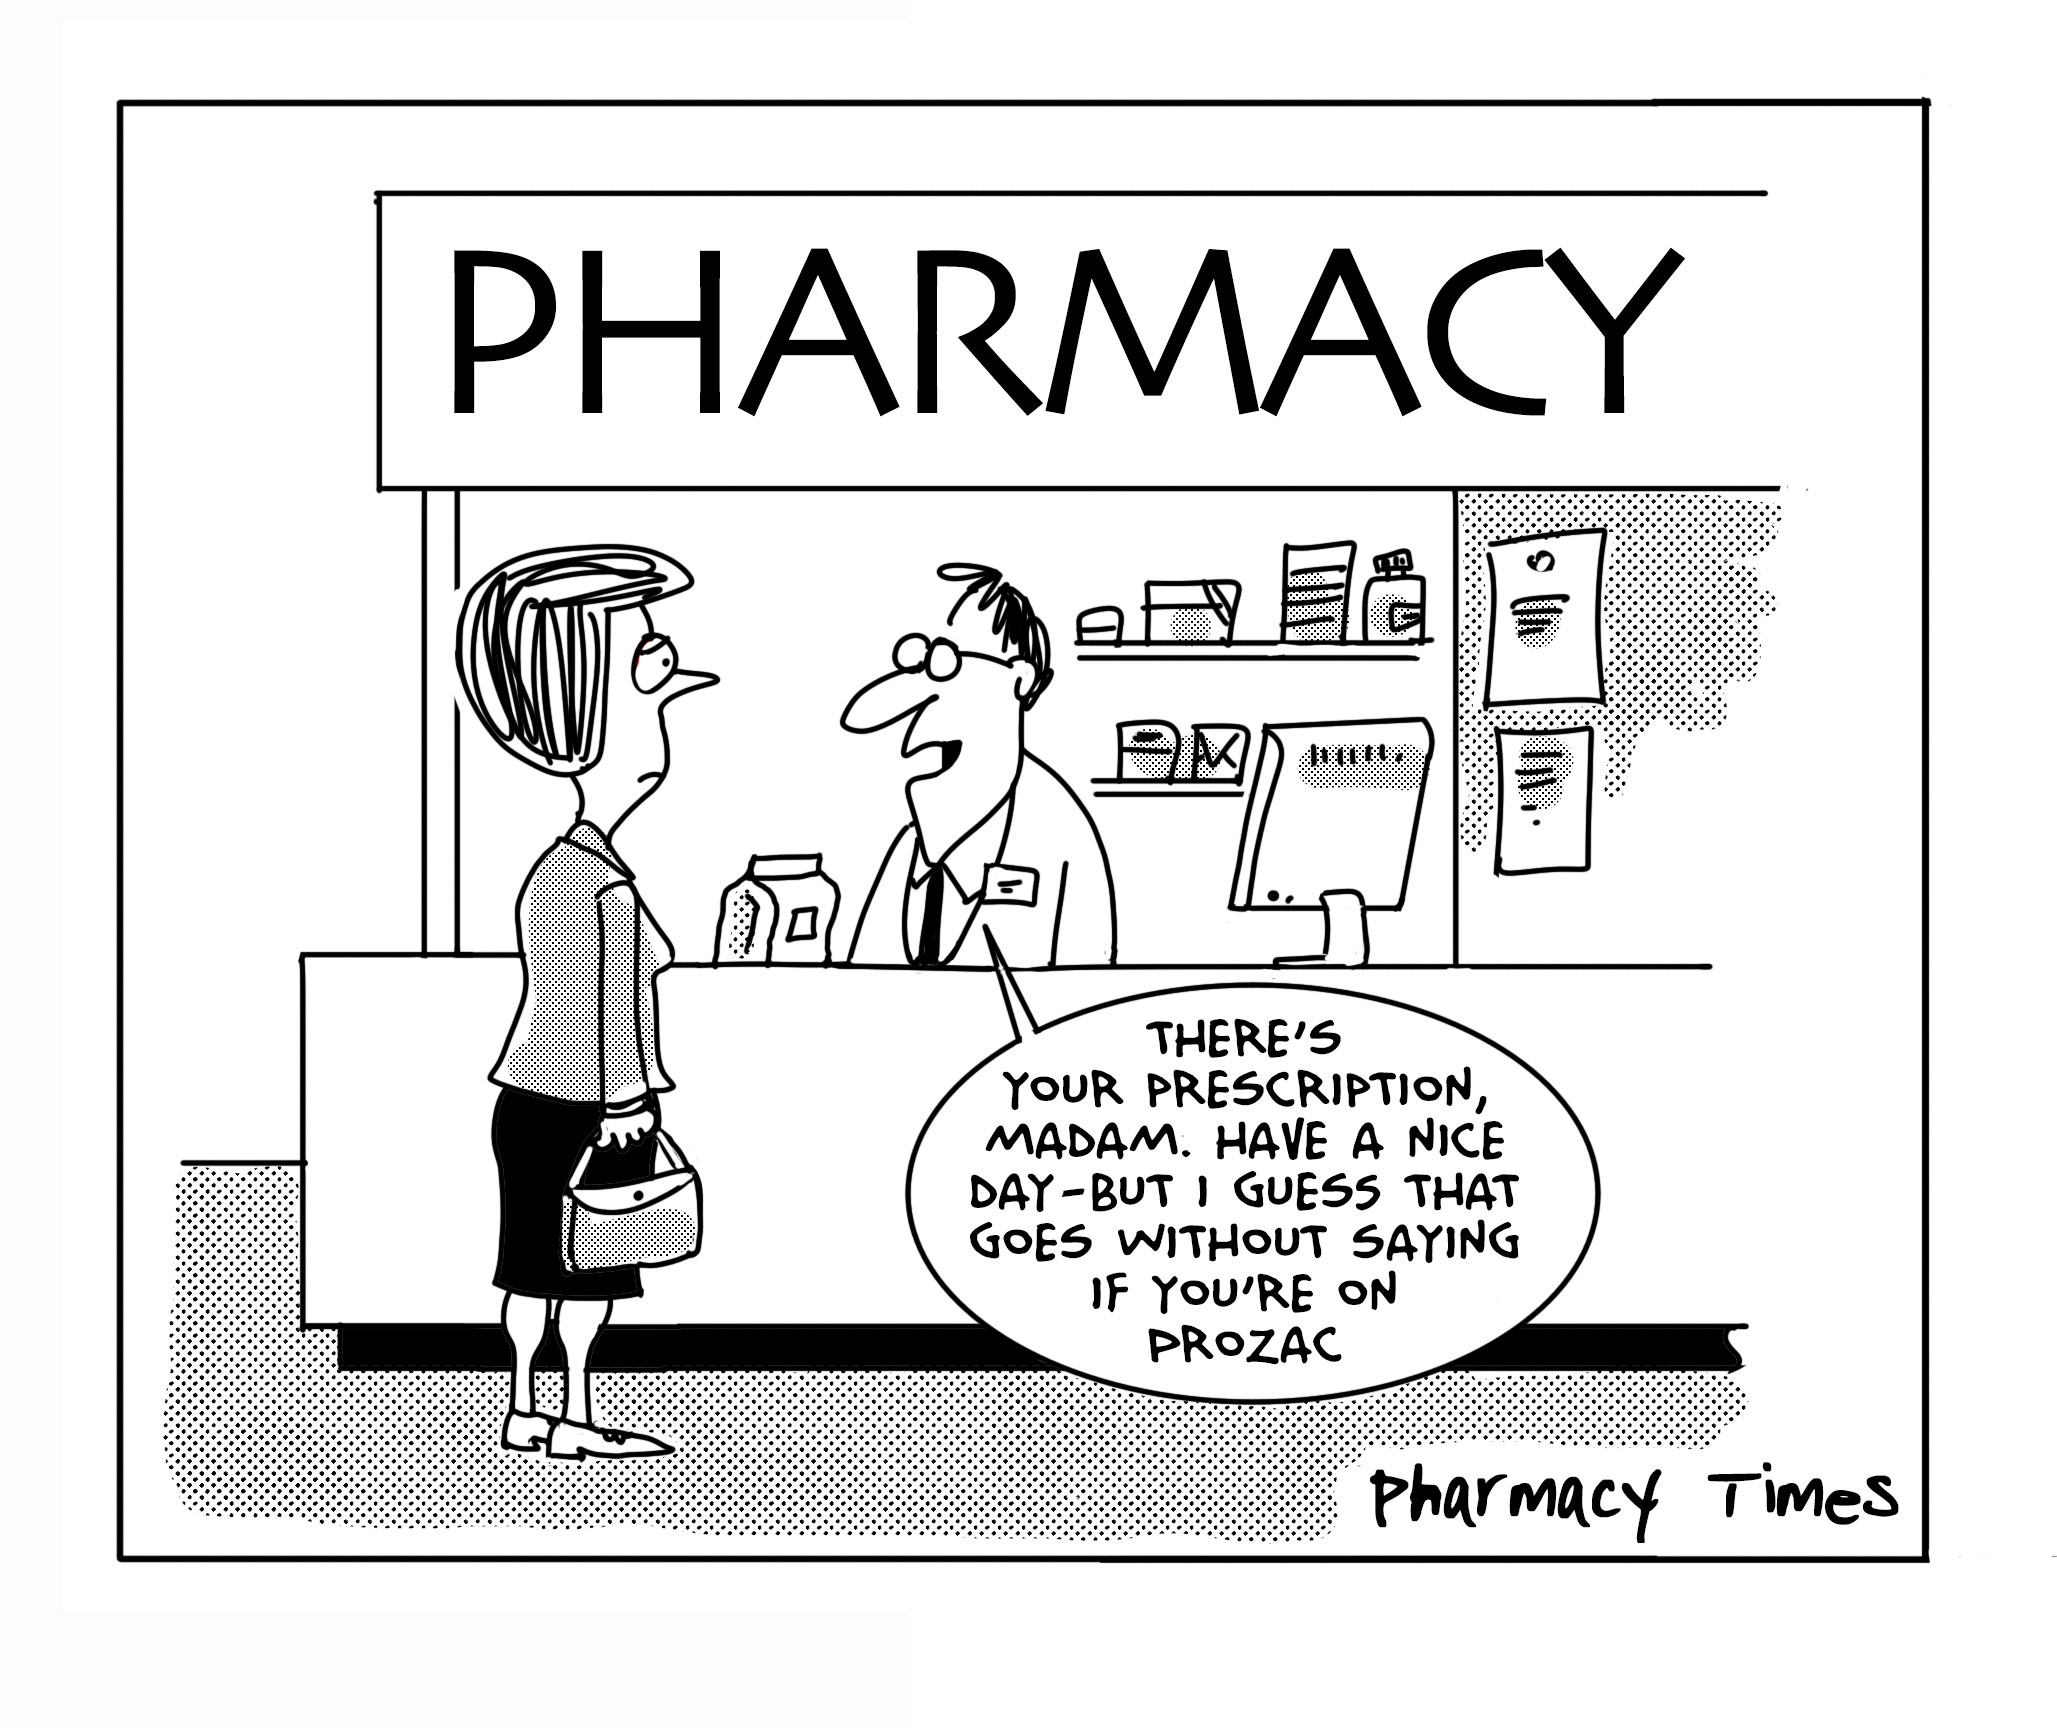 Farmer Cyst – Have a nice day! - The Pharmacy Times